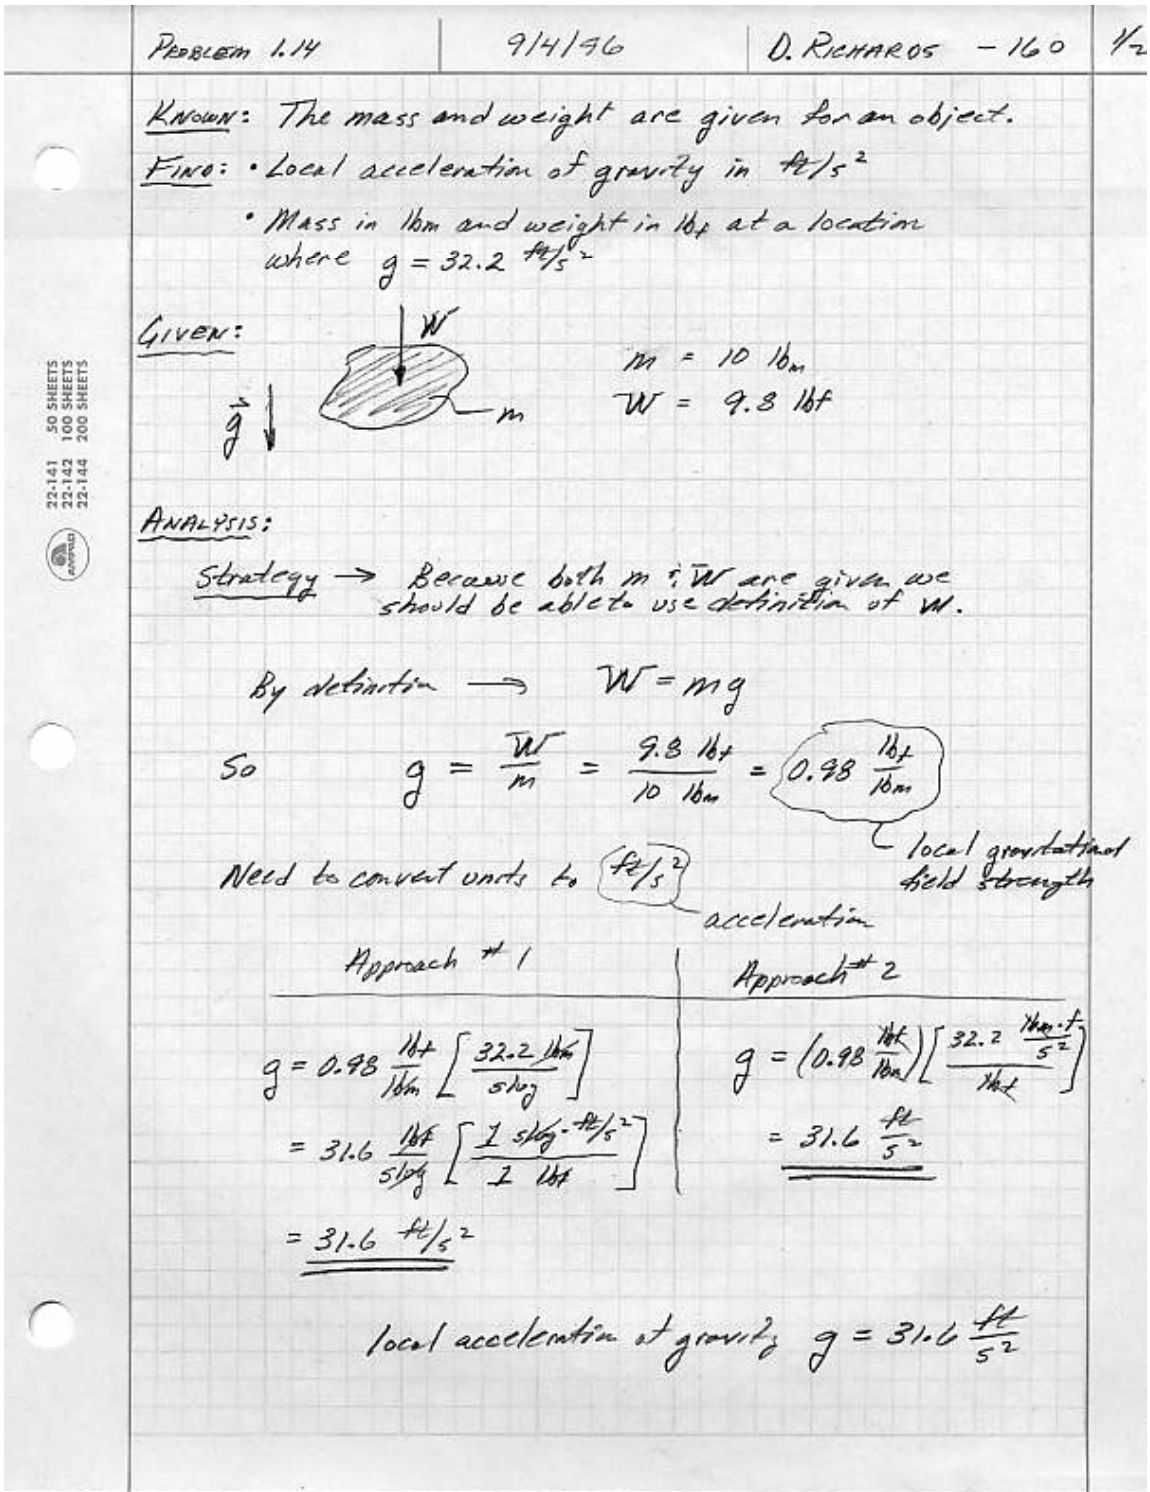 Page 1 of 2 of Don Richards' solution to problem 1.14, showing the known information, the information to be found, the analysis strategy, and unit conversion for the gravitational acceleration constant.